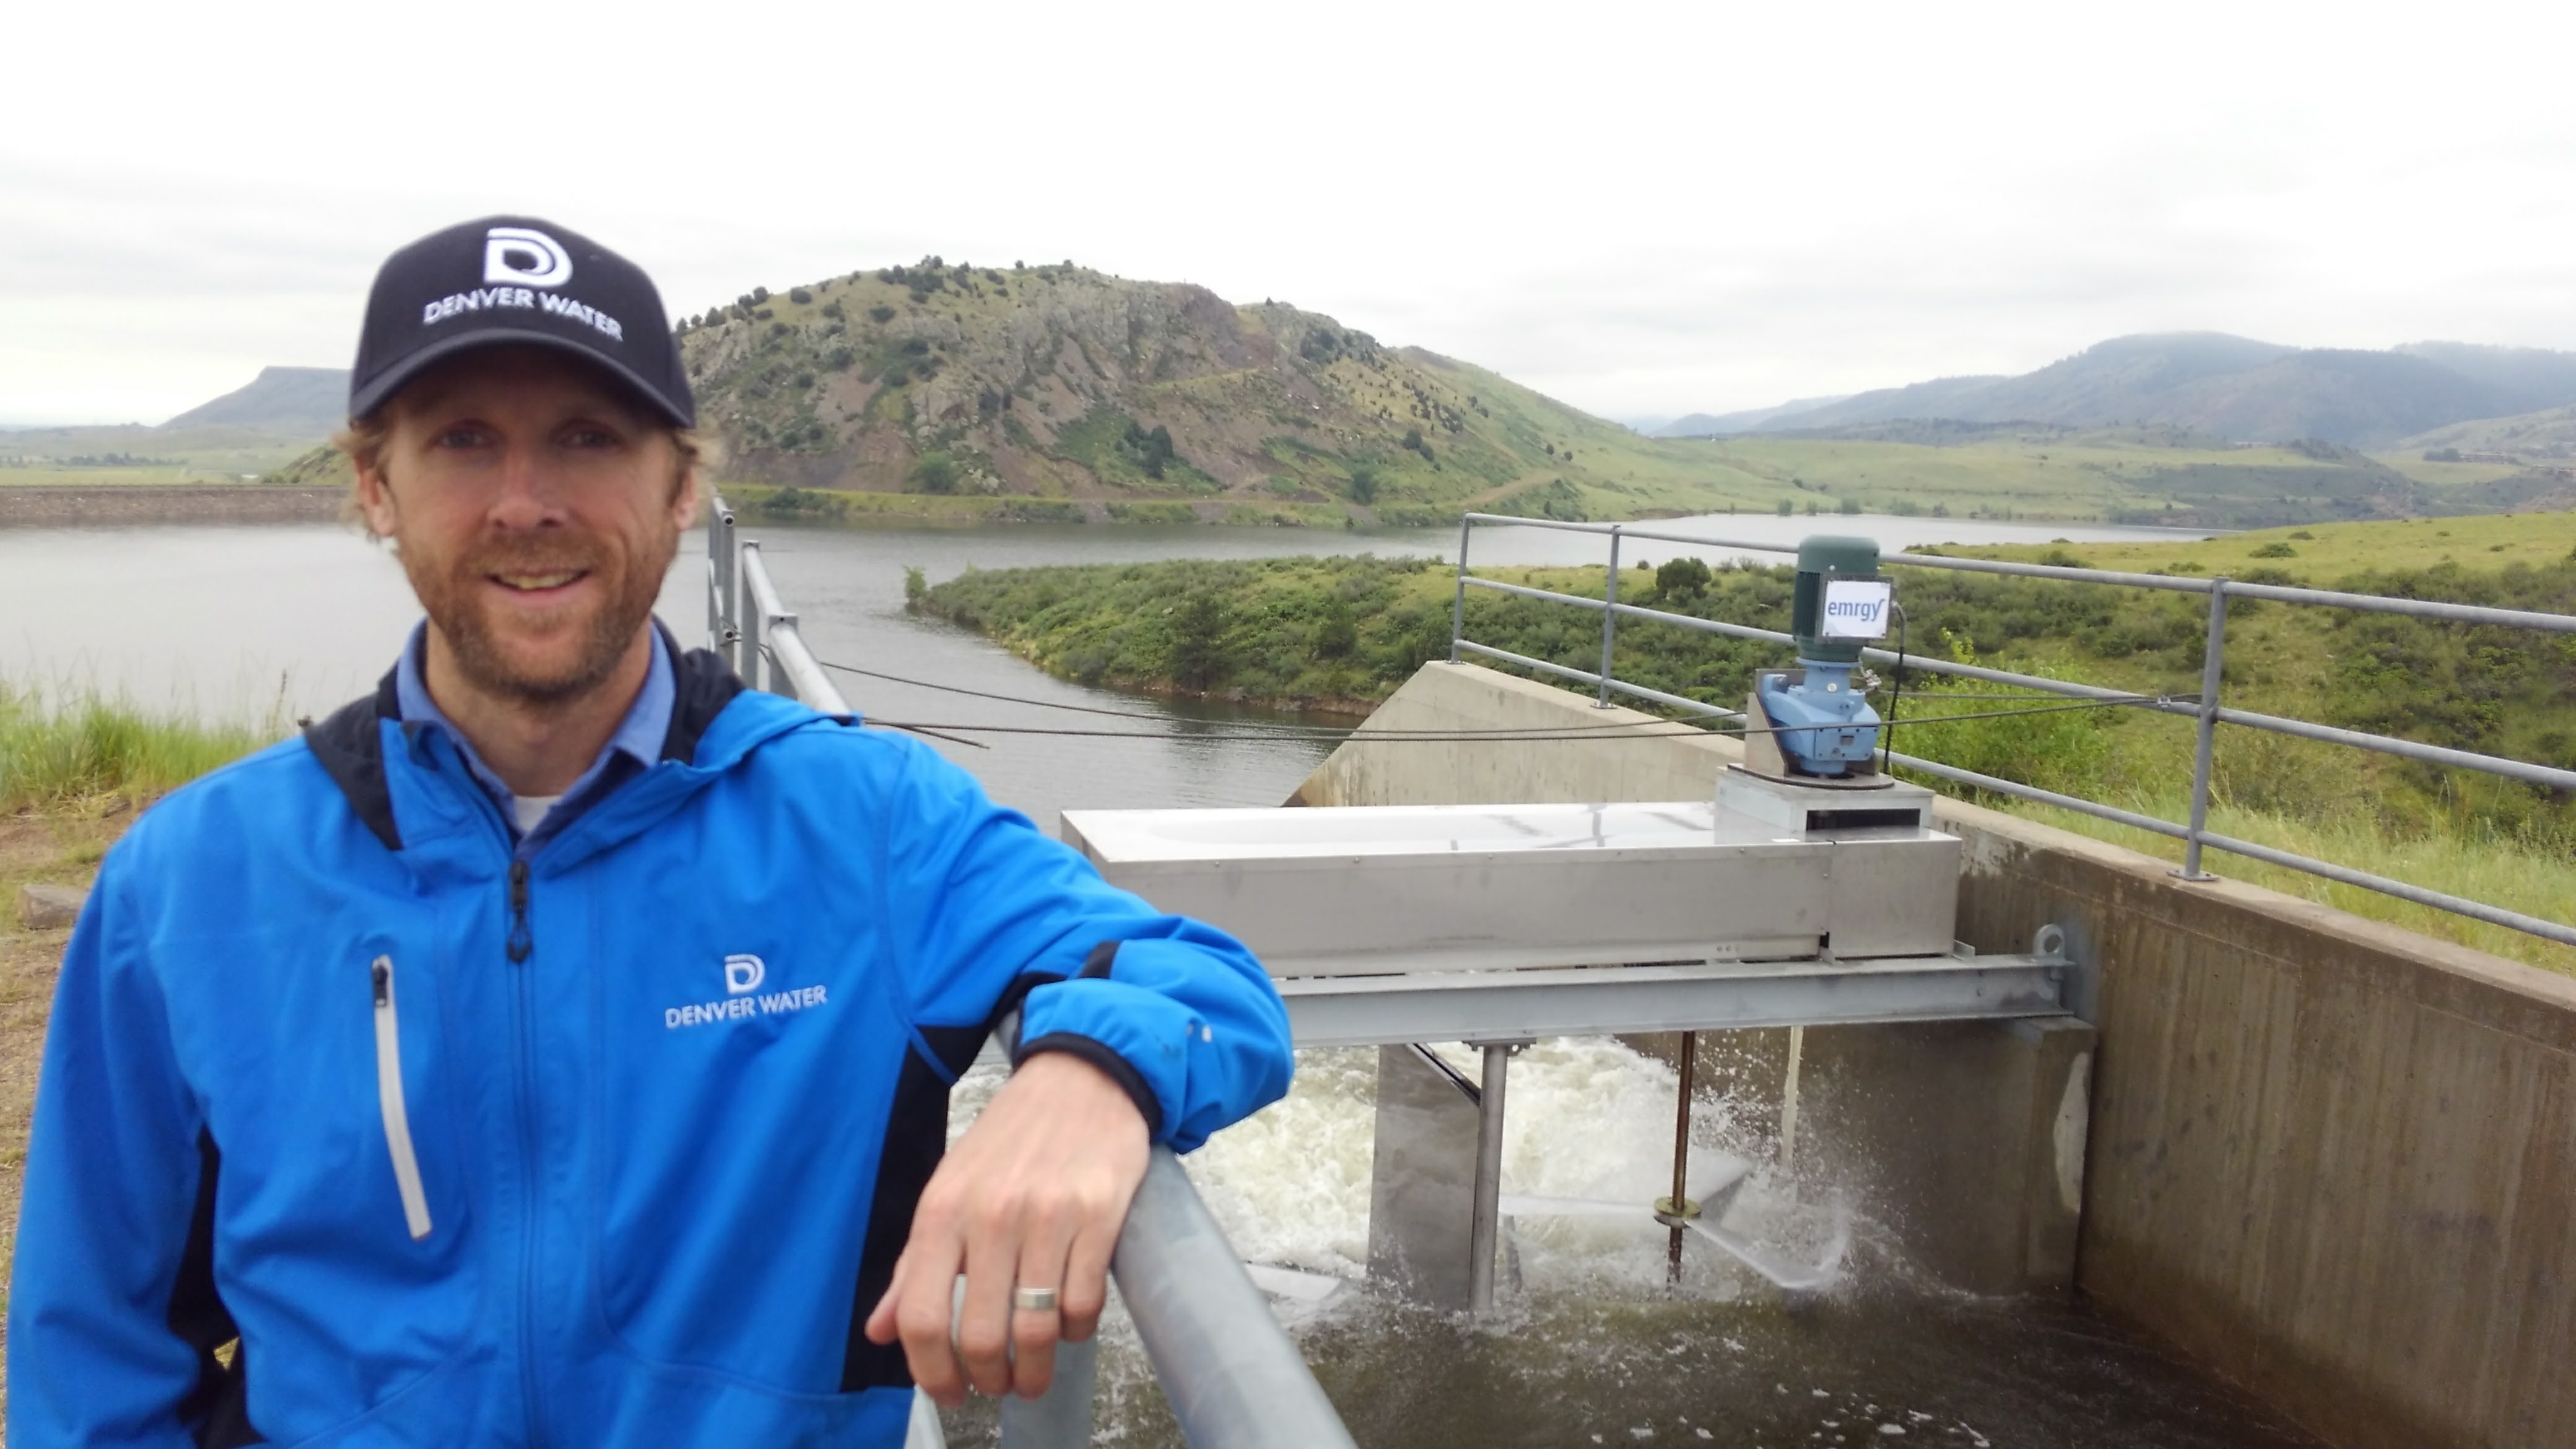 Ian Oliver, Denver Water's project manager for the Emrgy pilot study, in front of the first installed turbine along South Boulder Canal.